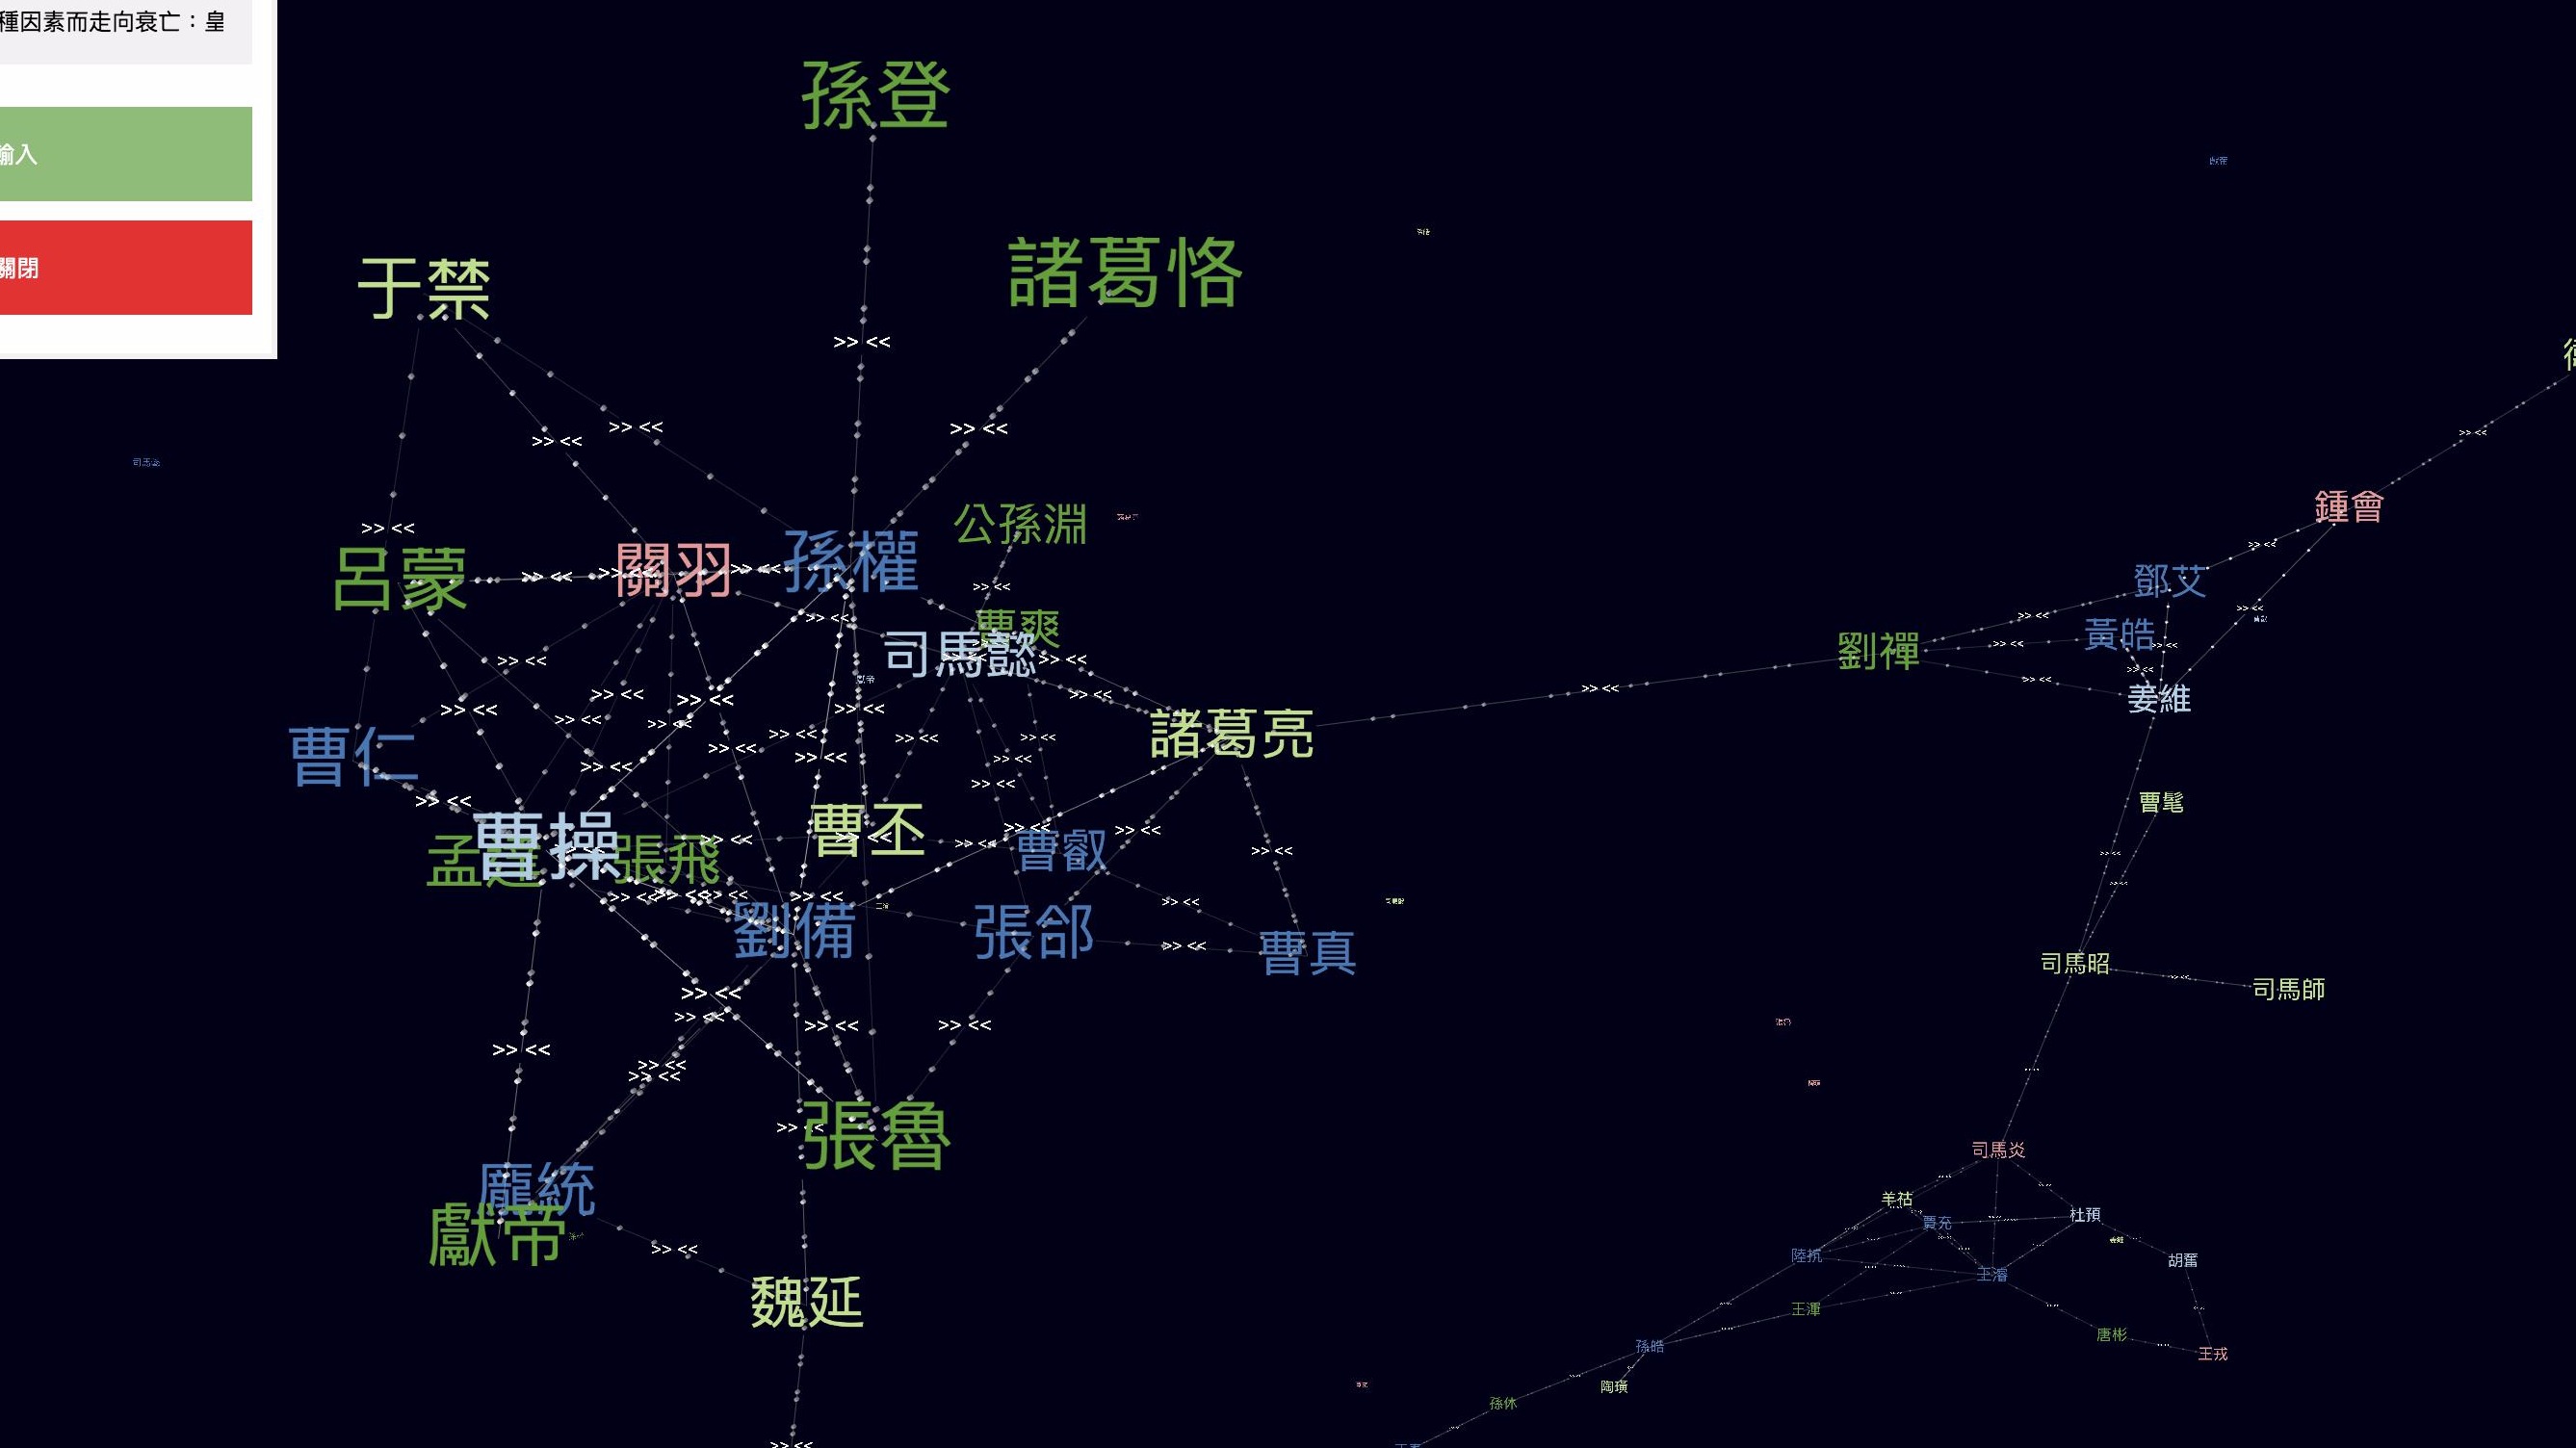 Toolkit for Customizable Social Network Analysis in the Three Kingdoms Period (可自訂三國時代社會網絡分析系統)